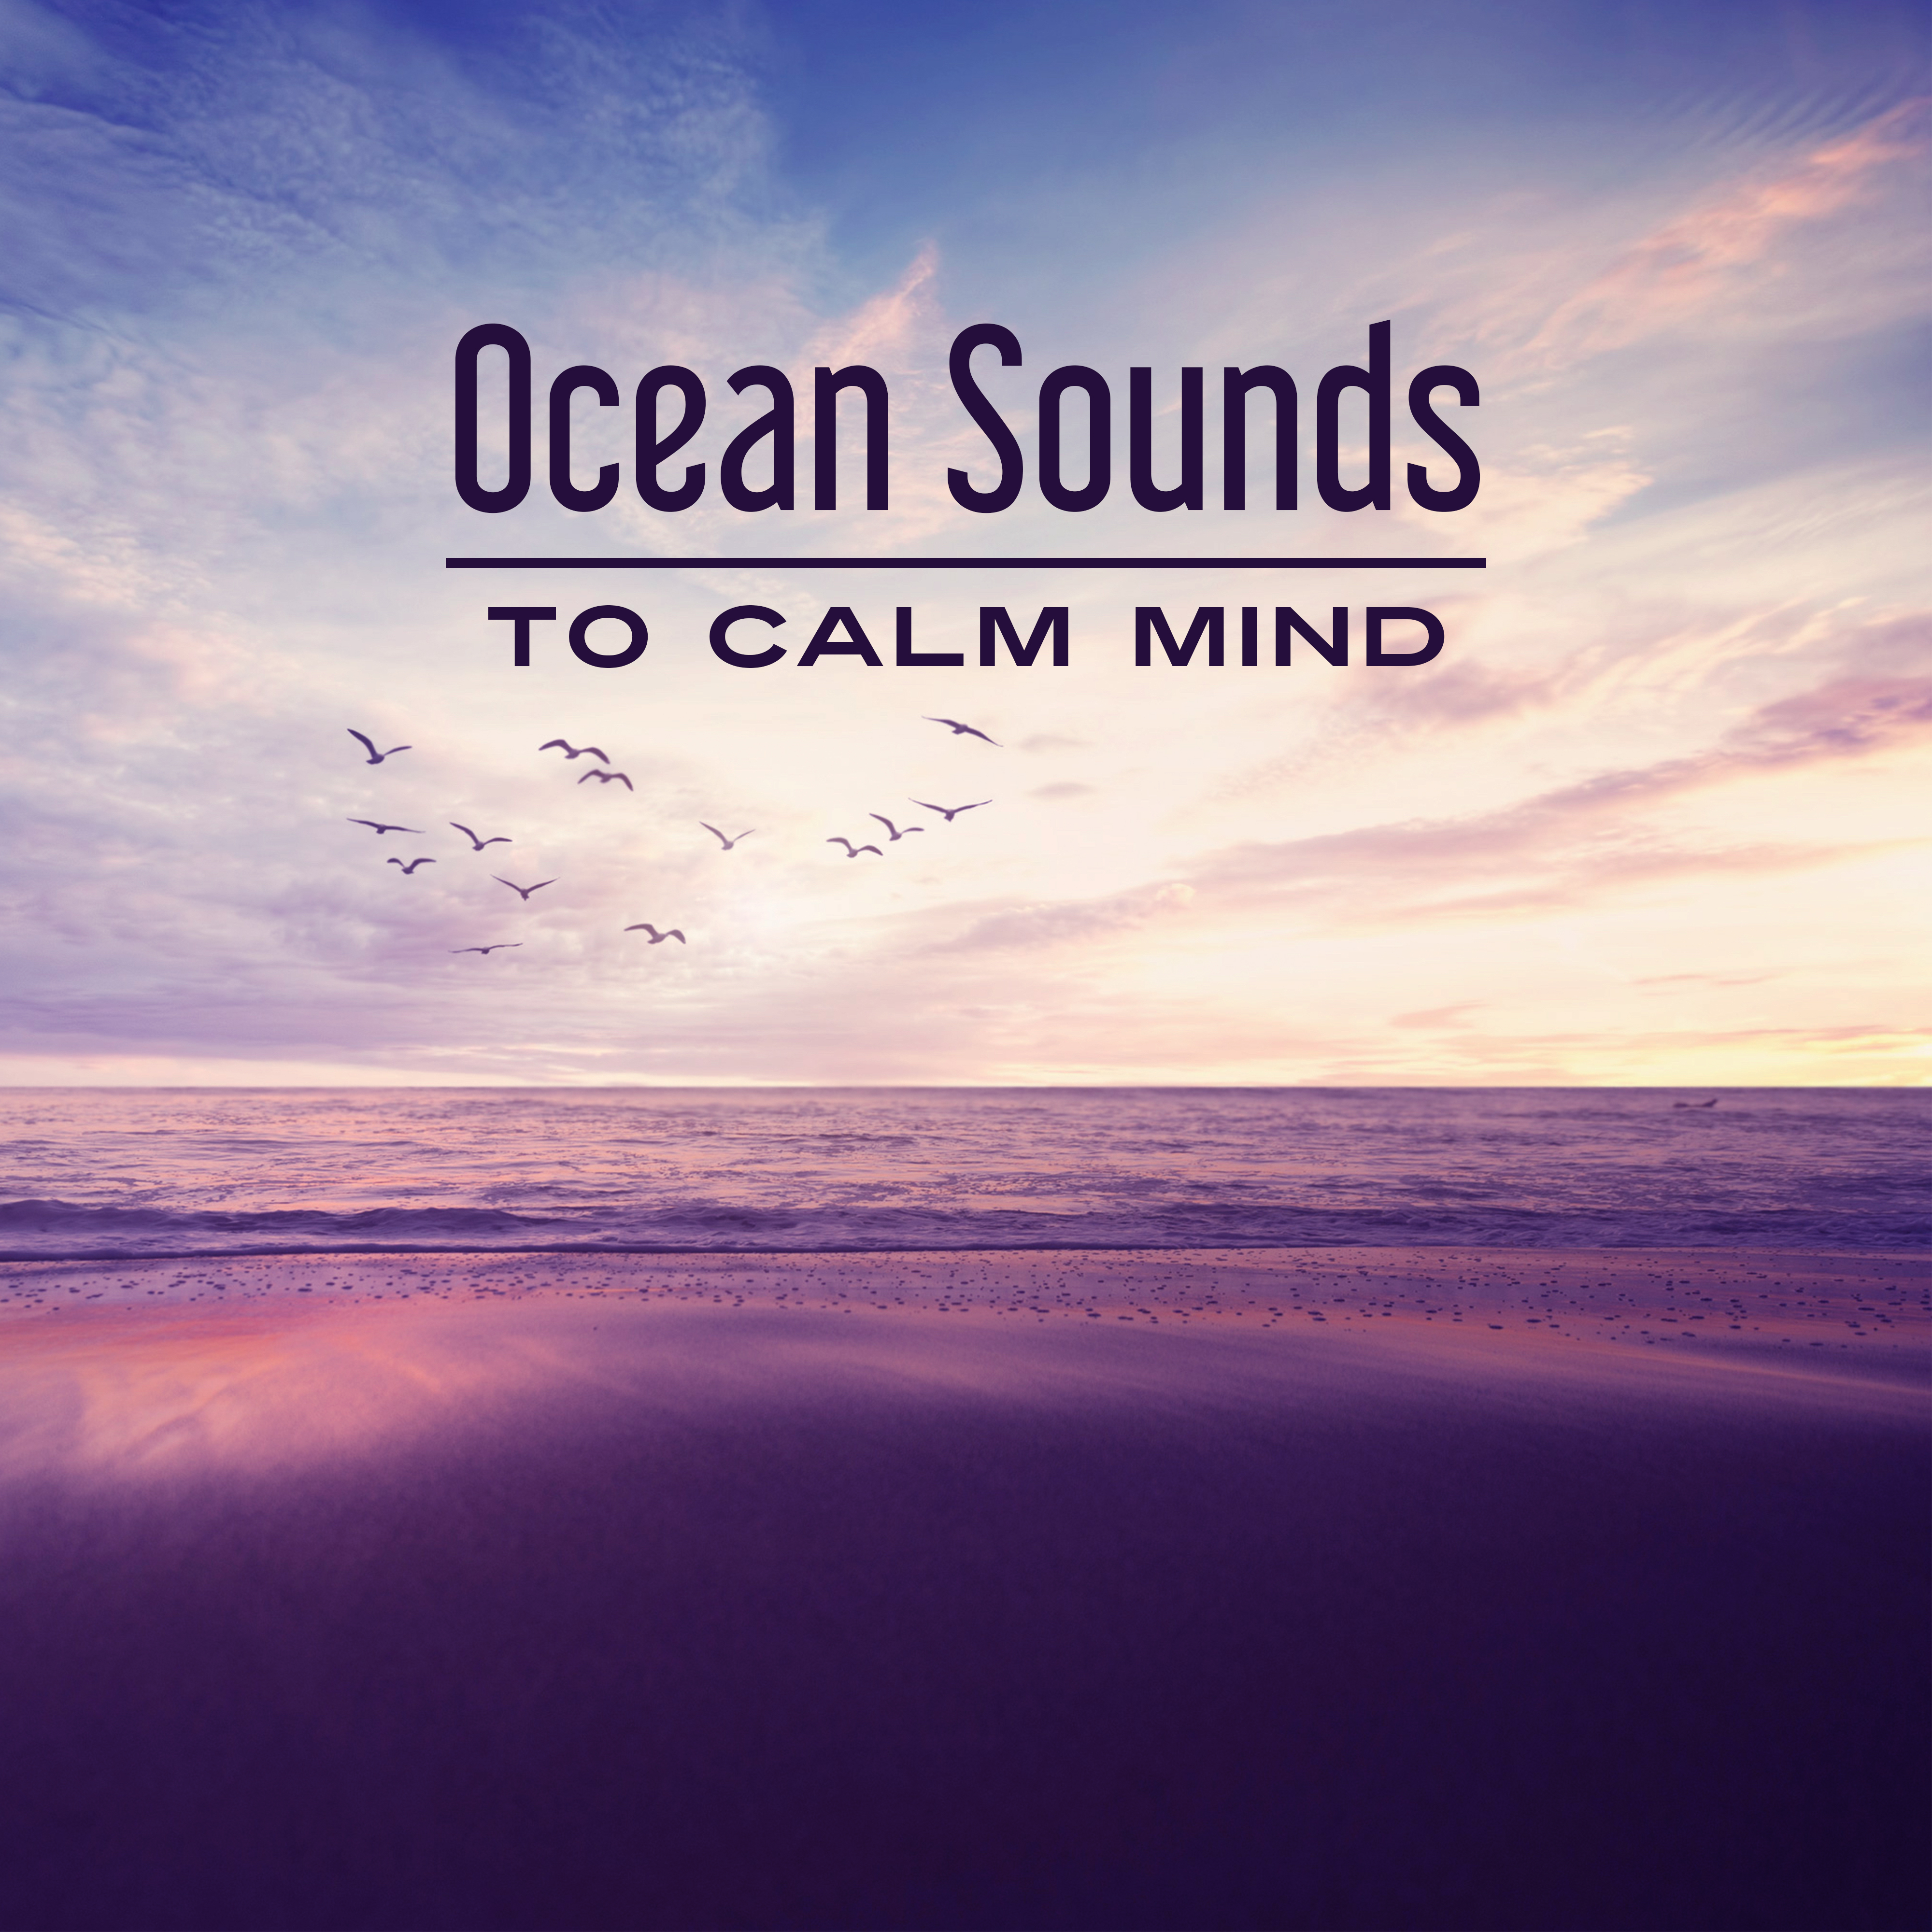 Ocean Sounds to Calm Mind  Stress Relief, Inner Relaxation, Peaceful Waves, Water Sounds, Music to Rest